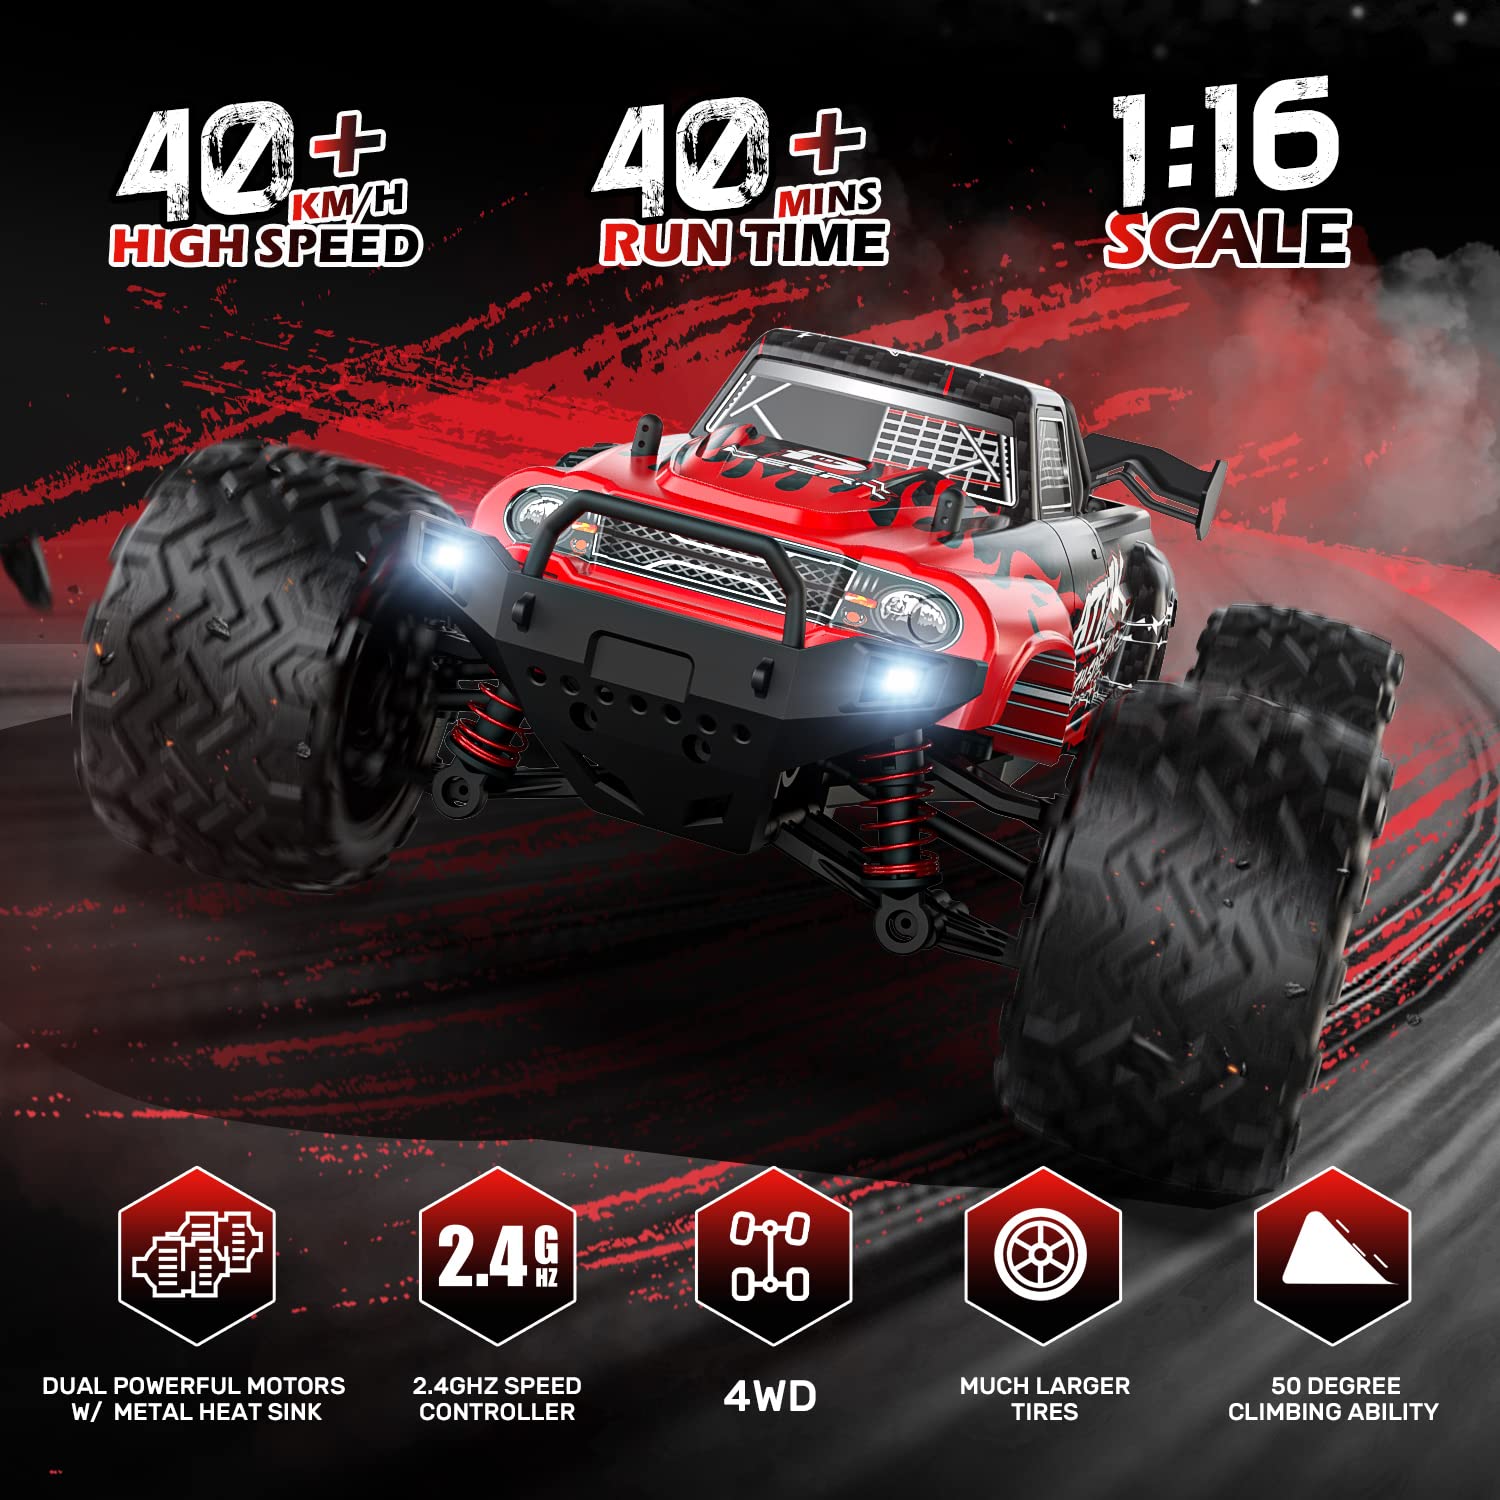 DEERC 9500E 1:16 Scale High Speed RC Car, RC Monster Truck,Racing Hobby Car for Adults, 40+kmh, 4WD All Terrain Off-Road Remote Control Car, 2.4Ghz RC Crawler, 2 Battery, Toy Gift for Kids